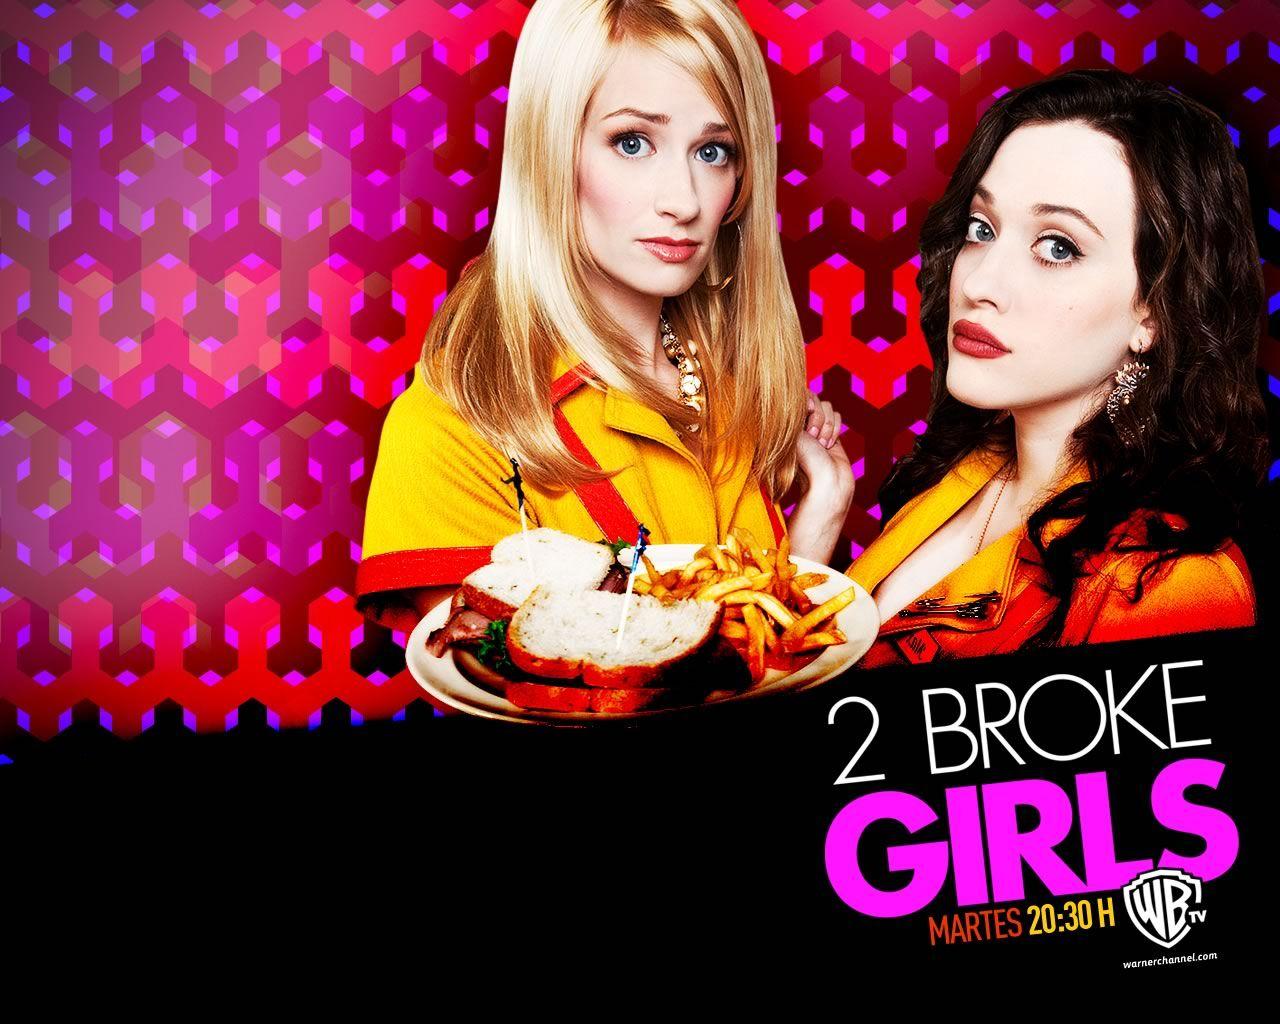 Why CBS comedy “2 Broke Girls” is antifeminist. another day